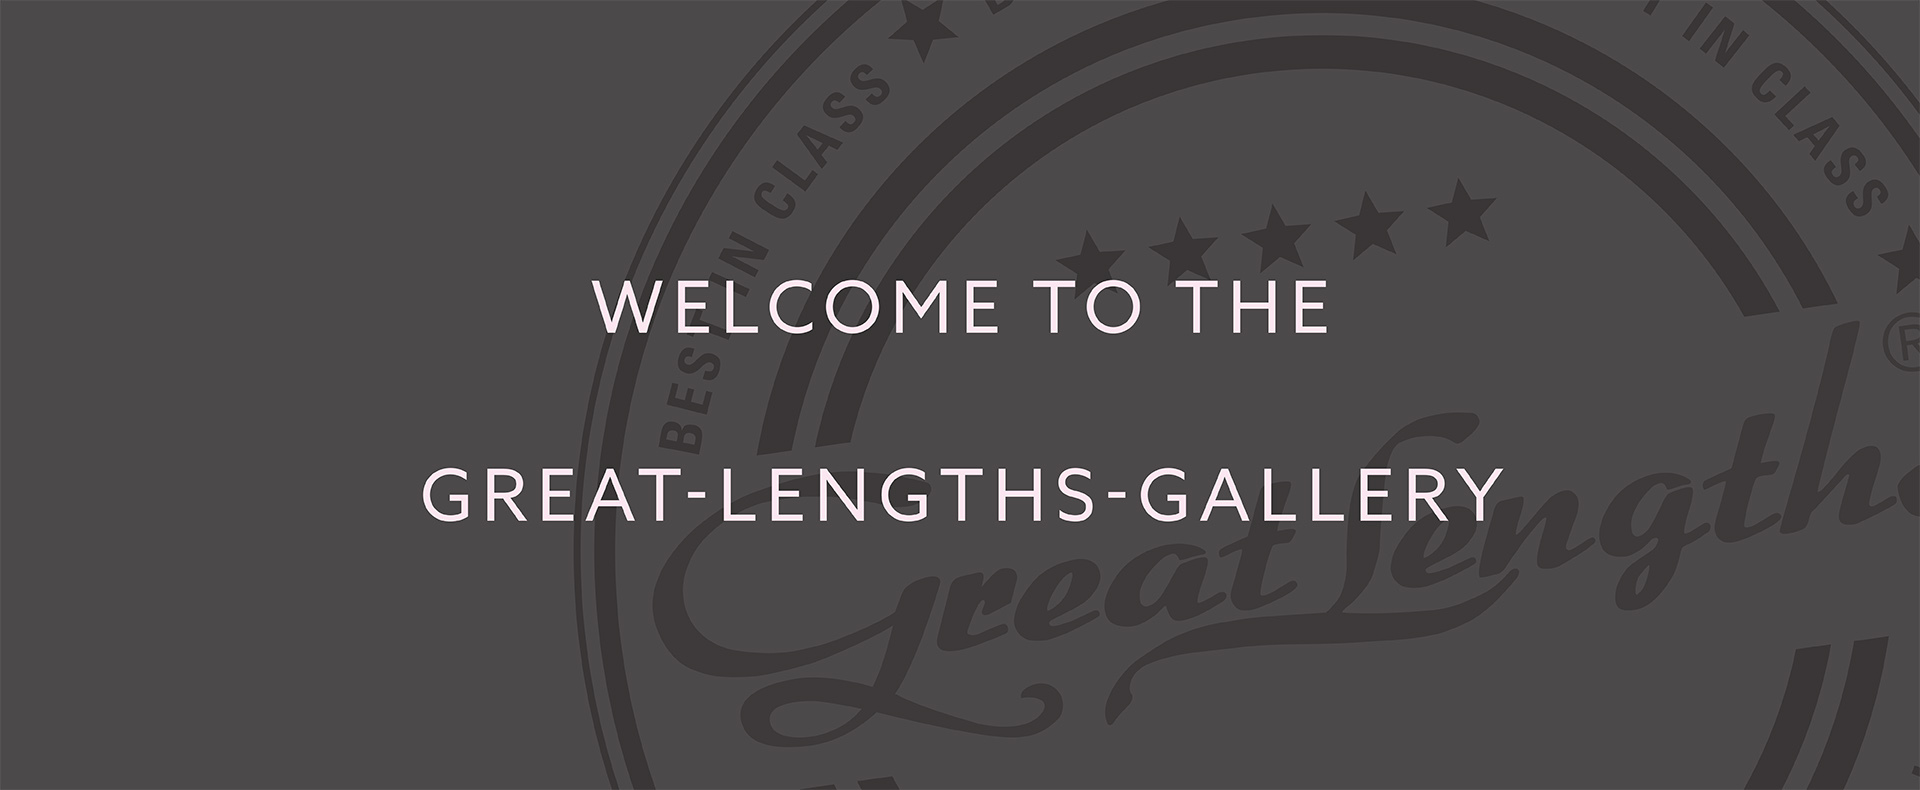 Welcome to the gallery (© Great Lengths)